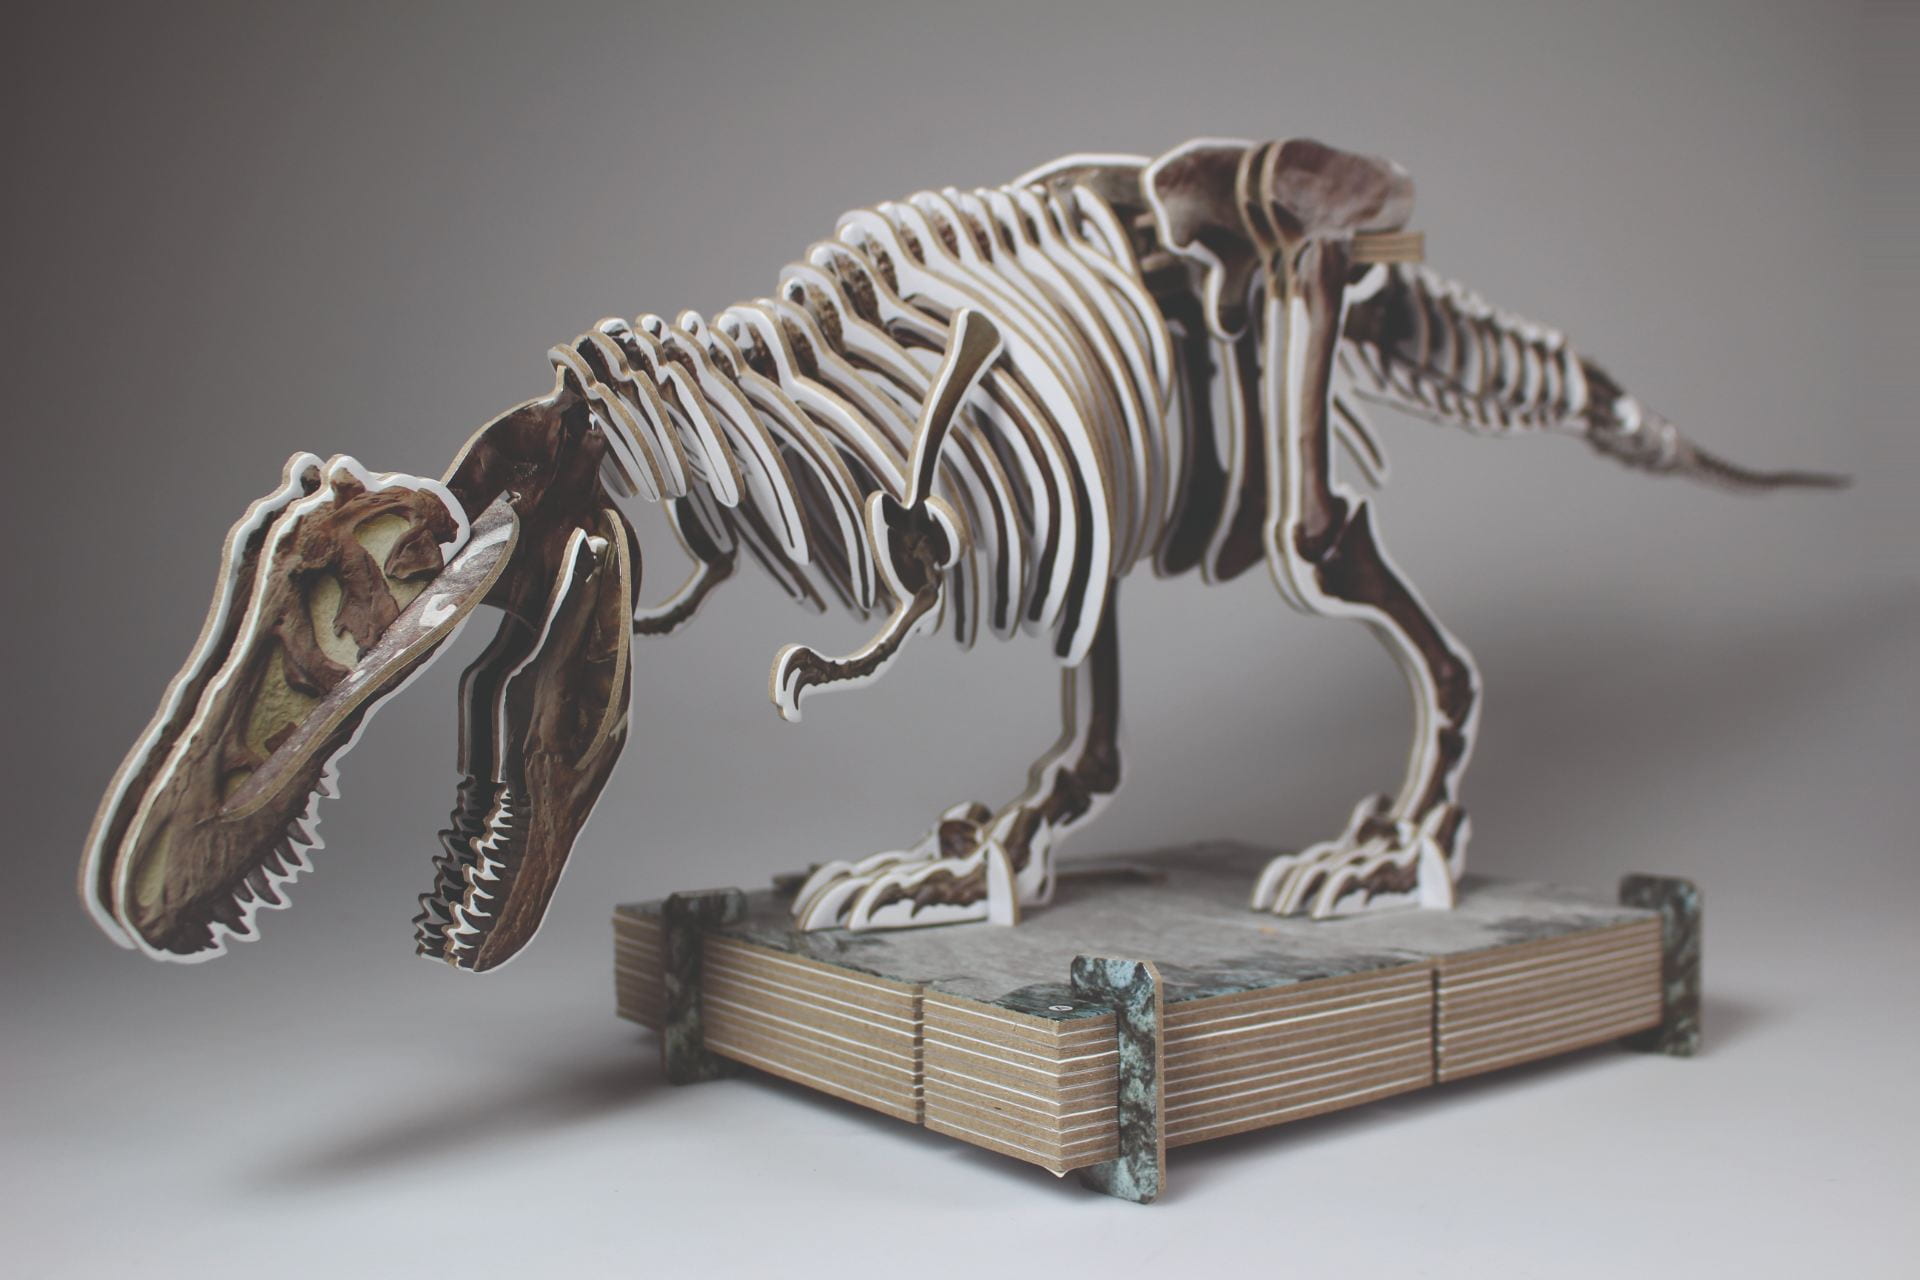 ‘Dorling Kindersley’, ‘Make Your Own T.Rex’ Picture Book, Model Kit Design by Jemma Westing